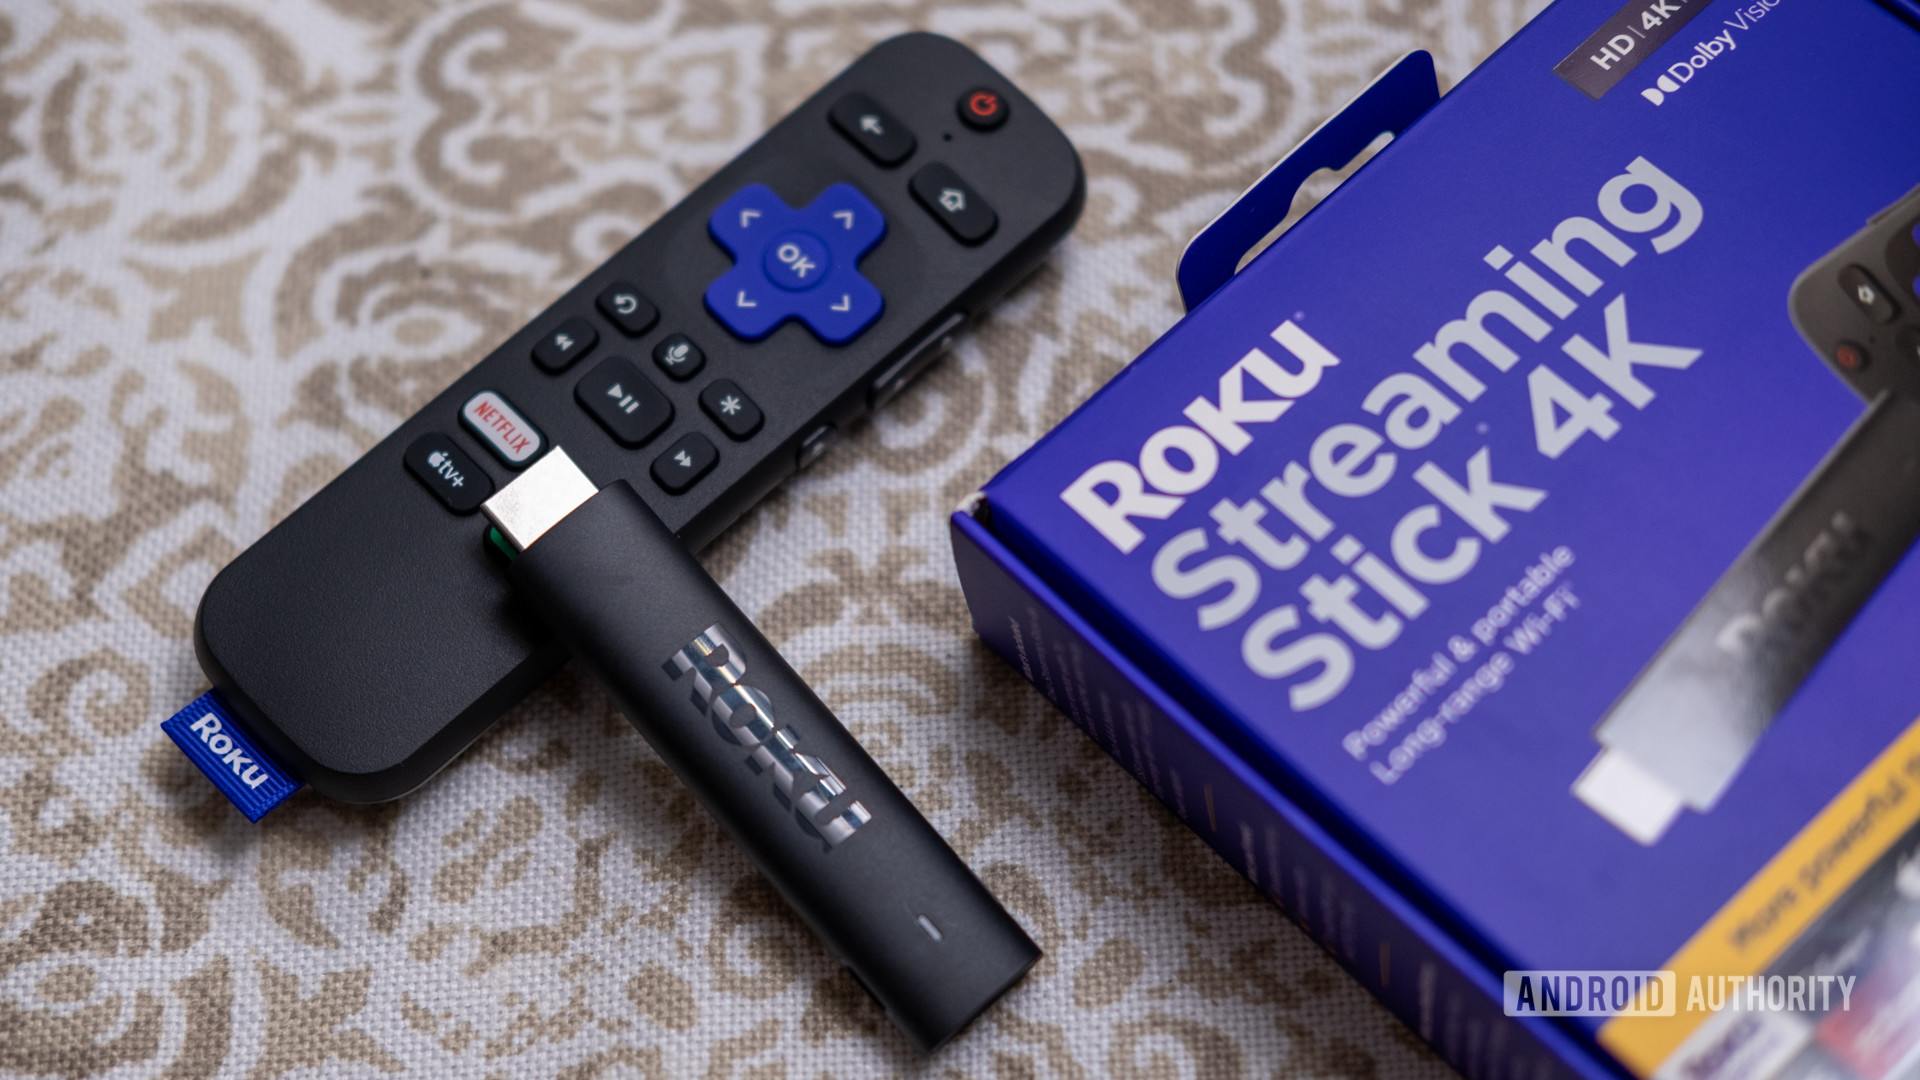 The Roku Streaming Stick 4K leaning on the remote